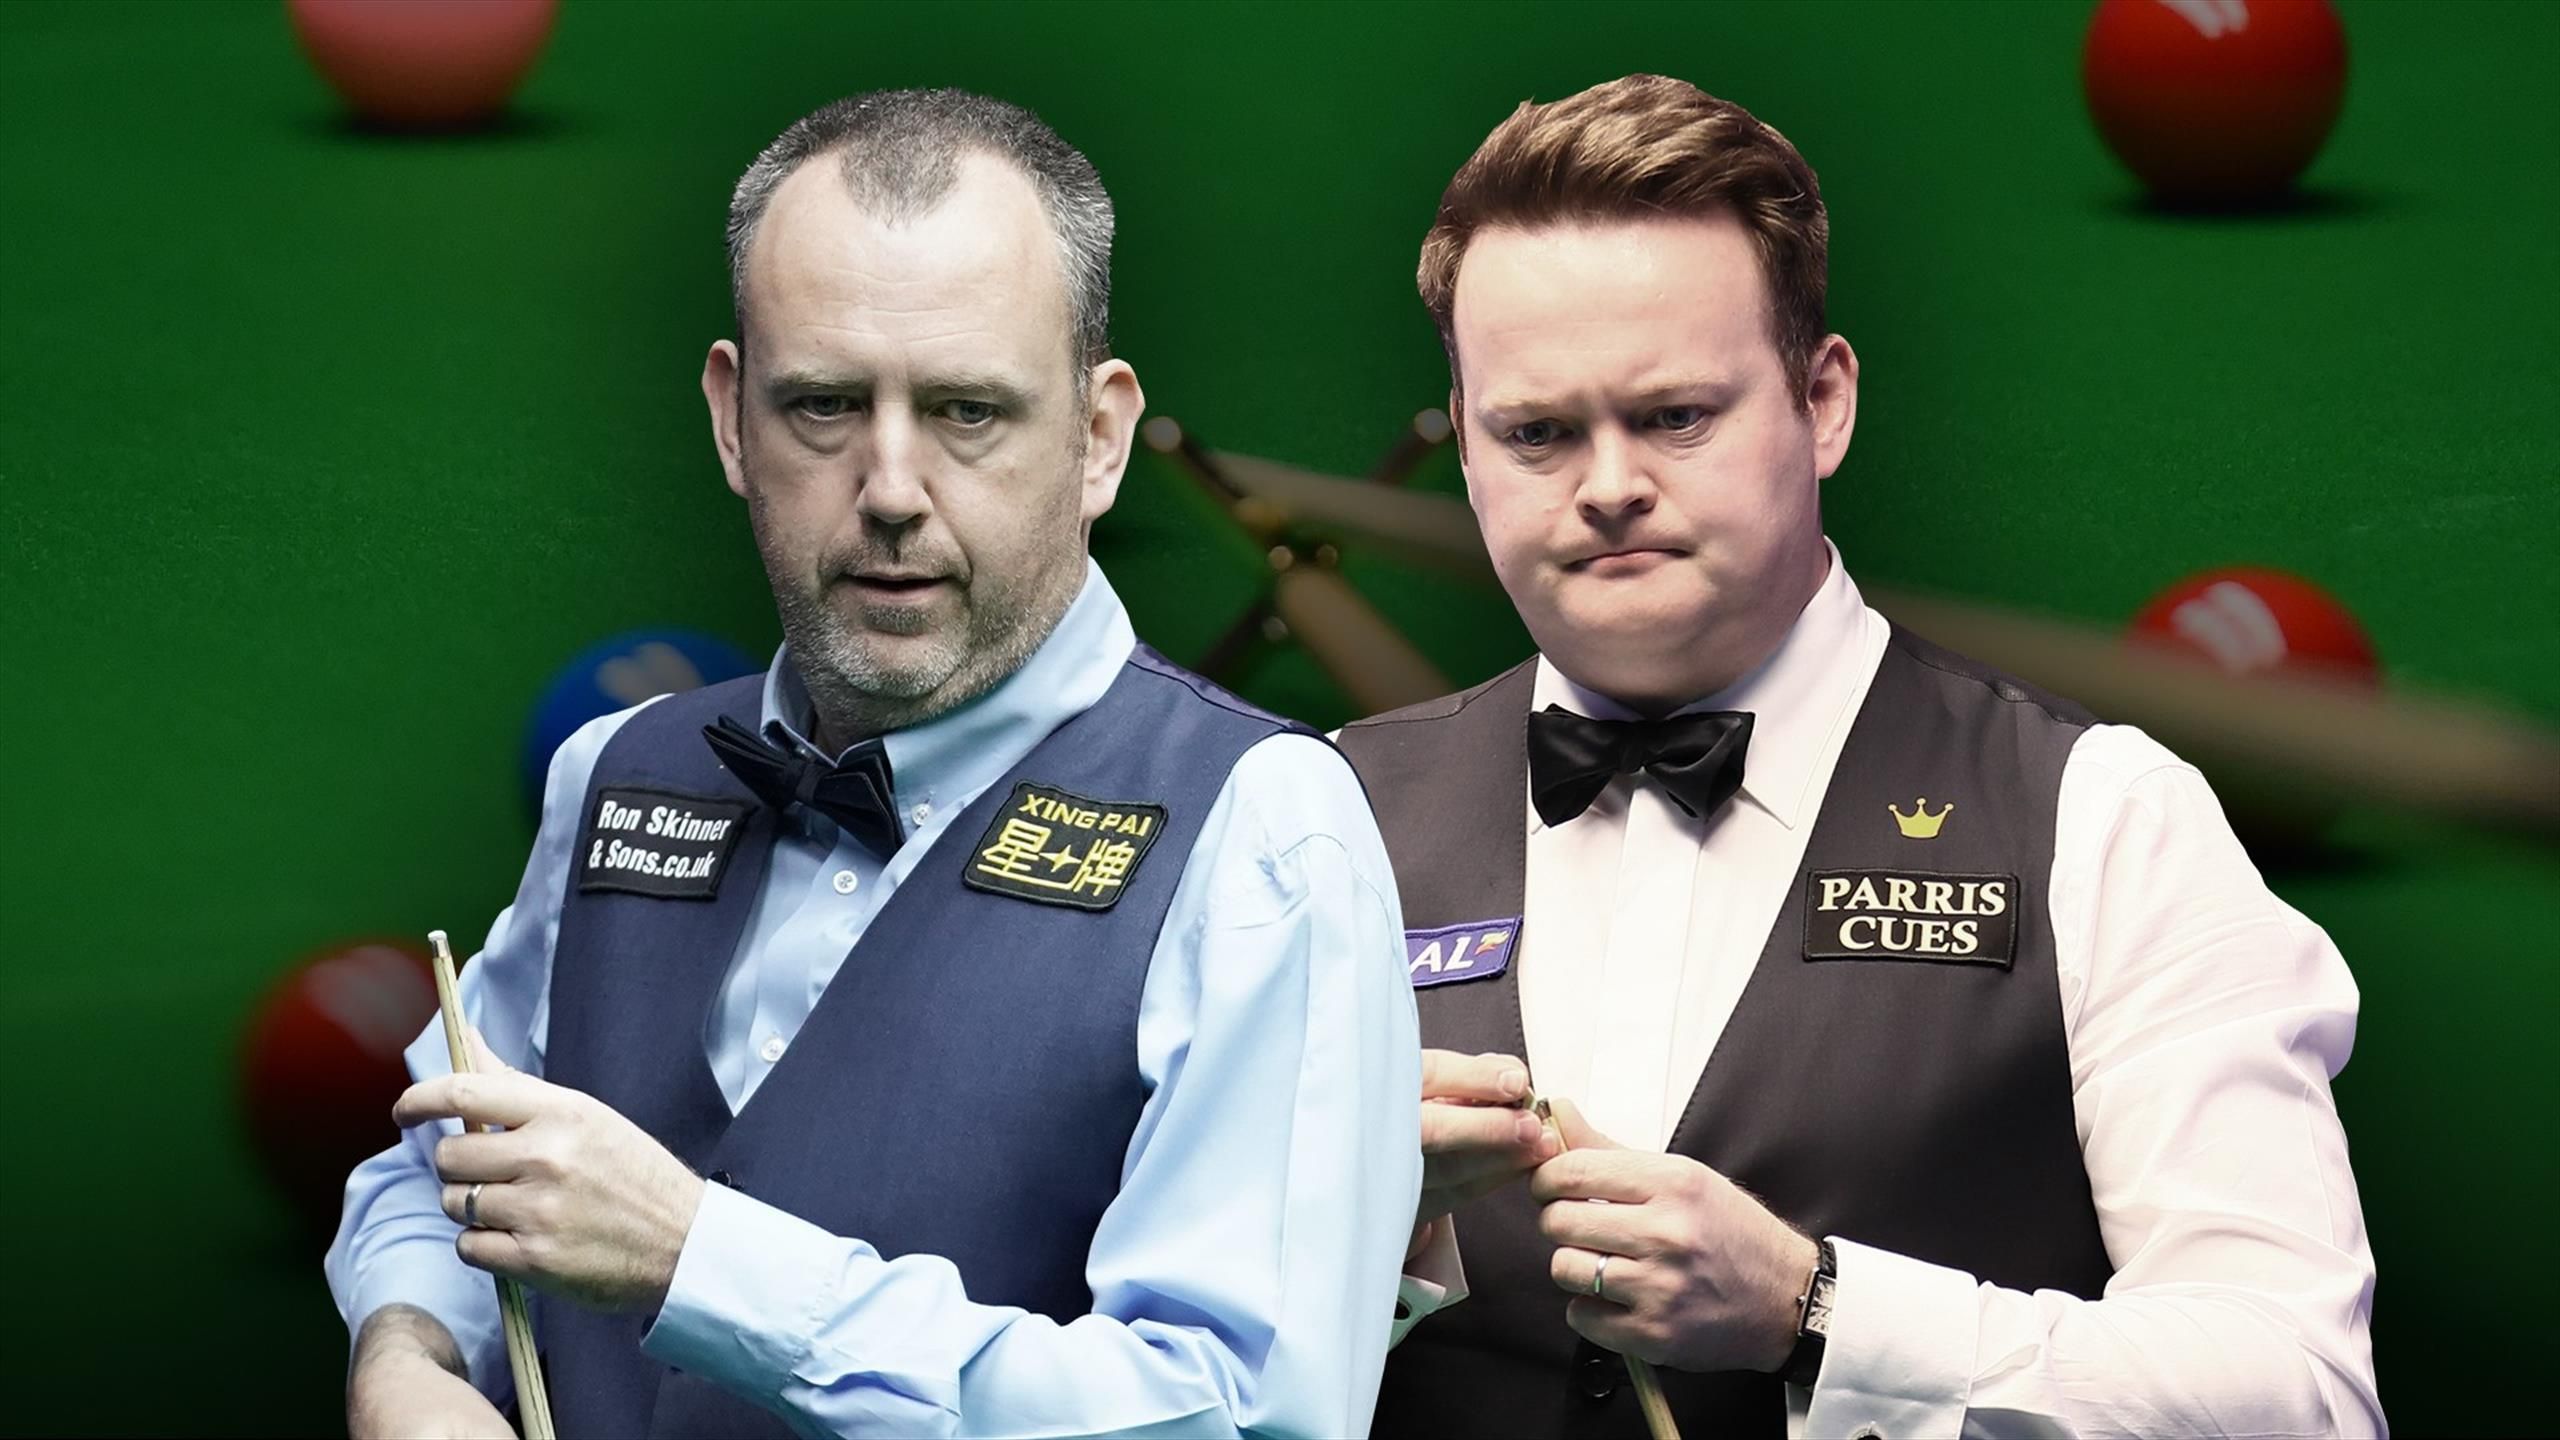 Masters snooker 2021 LIVE updates - Stuart Bingham, Shaun Murphy and Mark Williams all in action